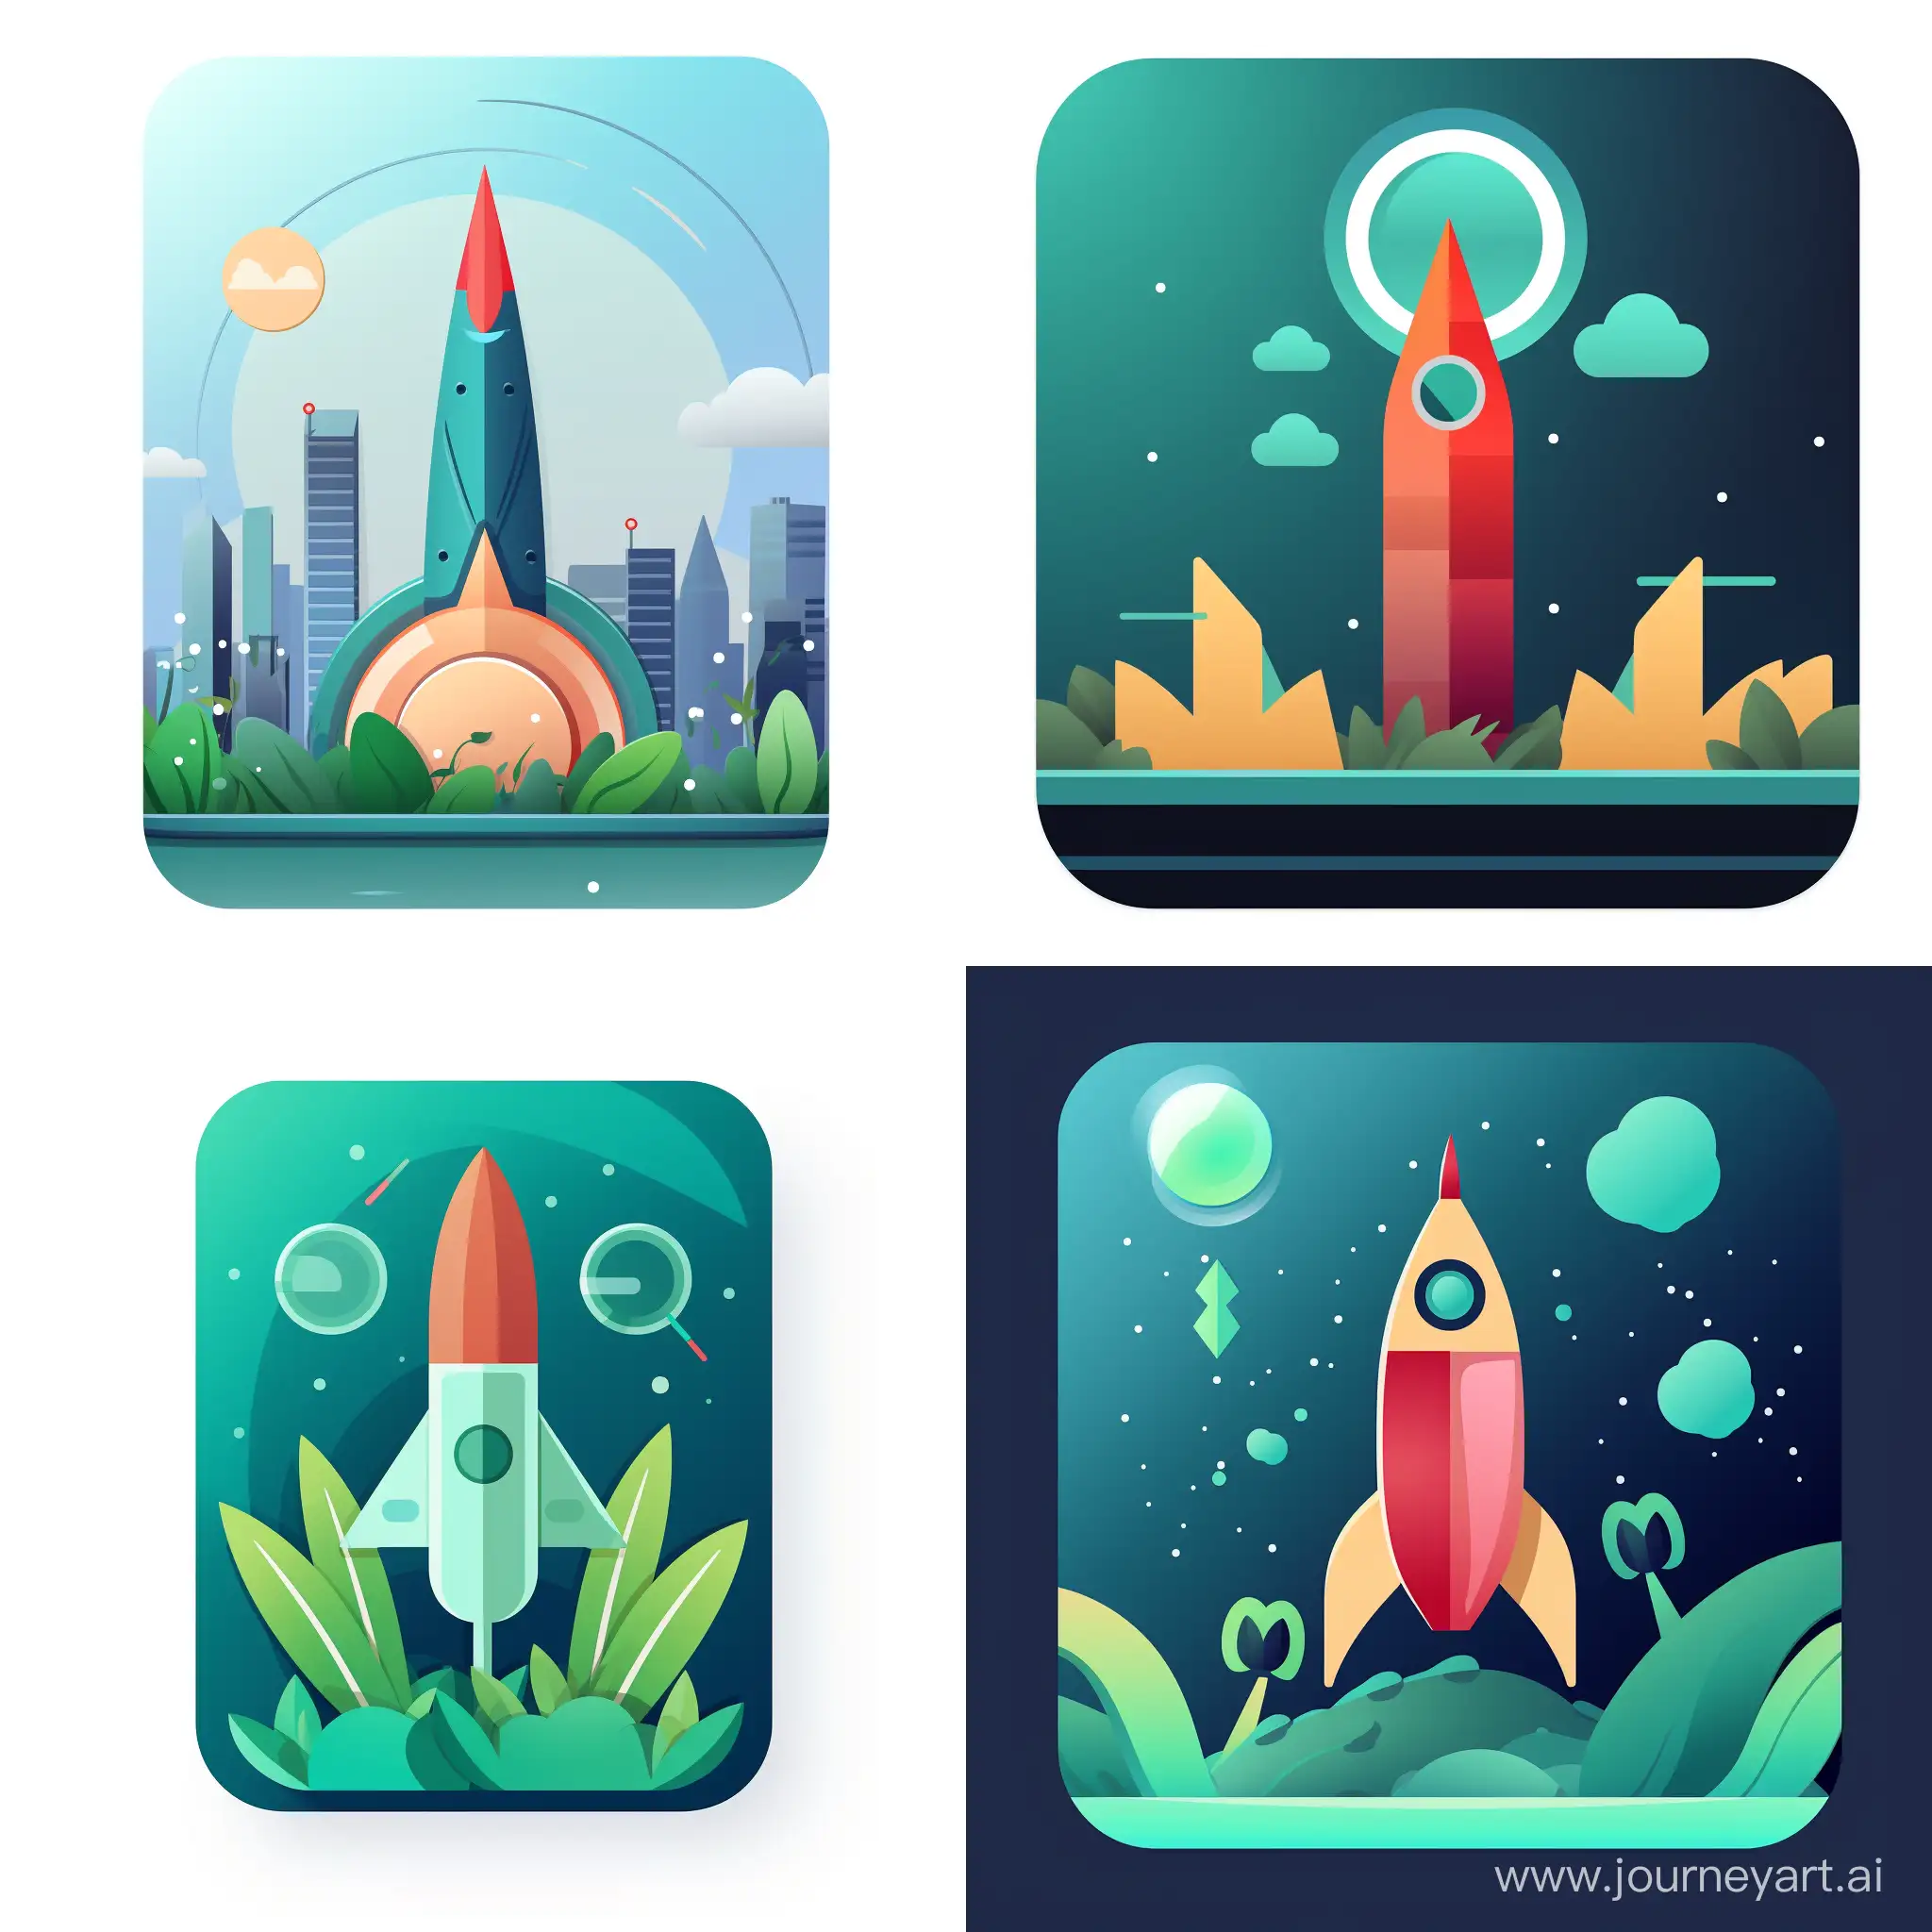 Design a flat vector iOS app logo icon, squared with round edges, a rocket taking off from a sprout, symbolizing the growth of both investments and knowledge from small beginnings. In the background, upwards line charts symbolize financial market growth.